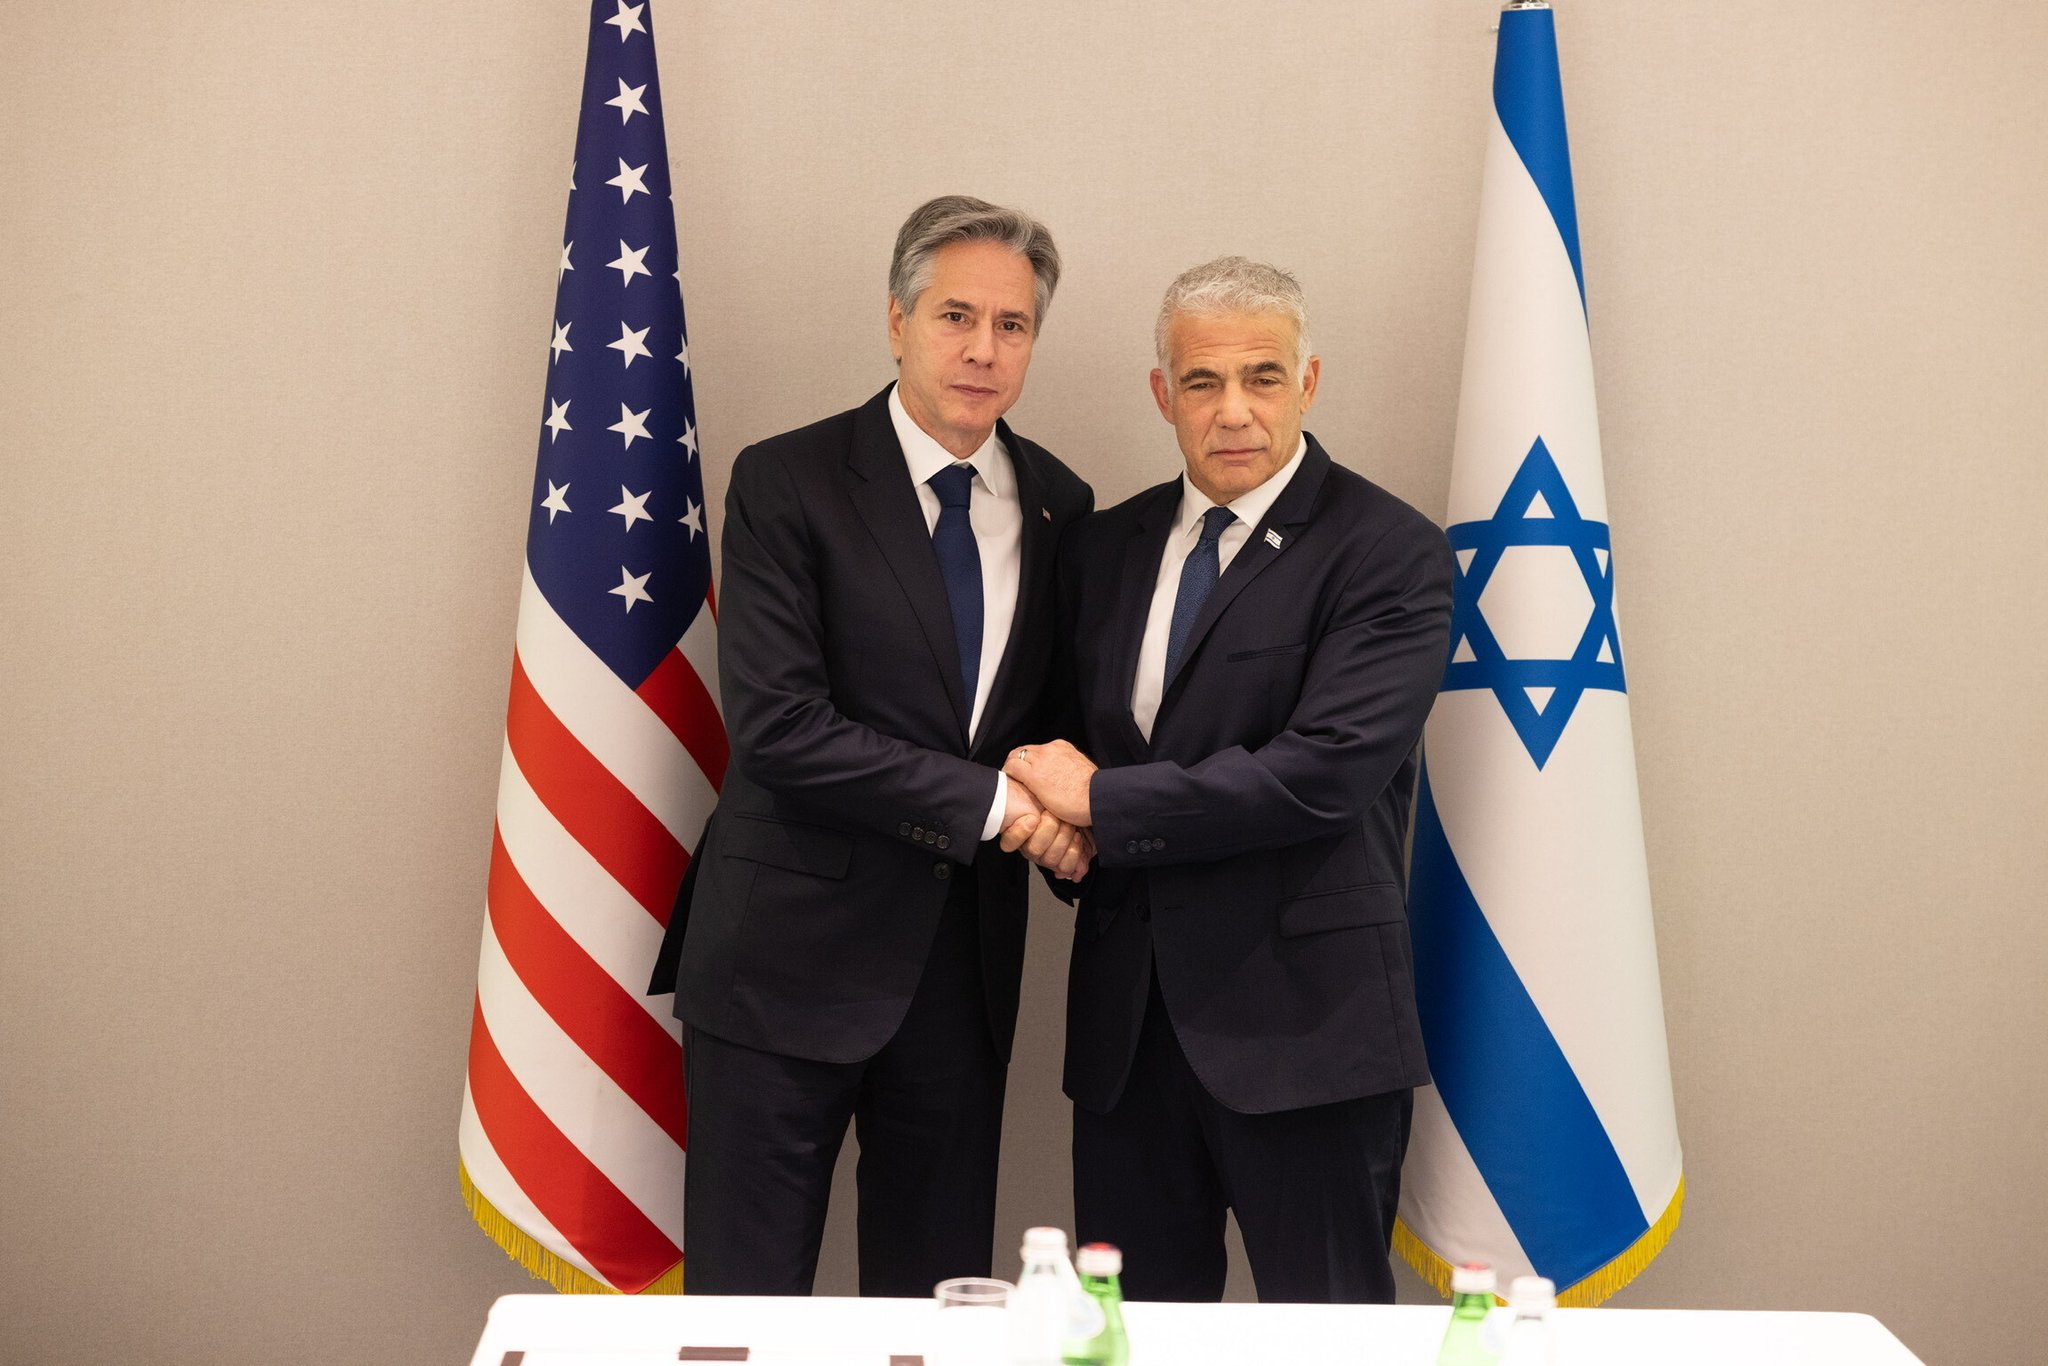 Secretary Antony Blinken @SecBlinken 4 .. 2023 I met with Israeli Opposition Leader   @yairlapid  to reiterate the United States commitment to Israel and its right to defend itself, as well as work to secure the release of hostages and further a two-state solution. Ũҡ ѧ  ѹ龺Ѻӽ¤ҹ  @yairlapid  ӤѭҢͧѰ յԷԢͧ㹡ûͧͧ ʹӧҹͻСѹûµǵǻСѹ дԹ䢻ѭͧѰ